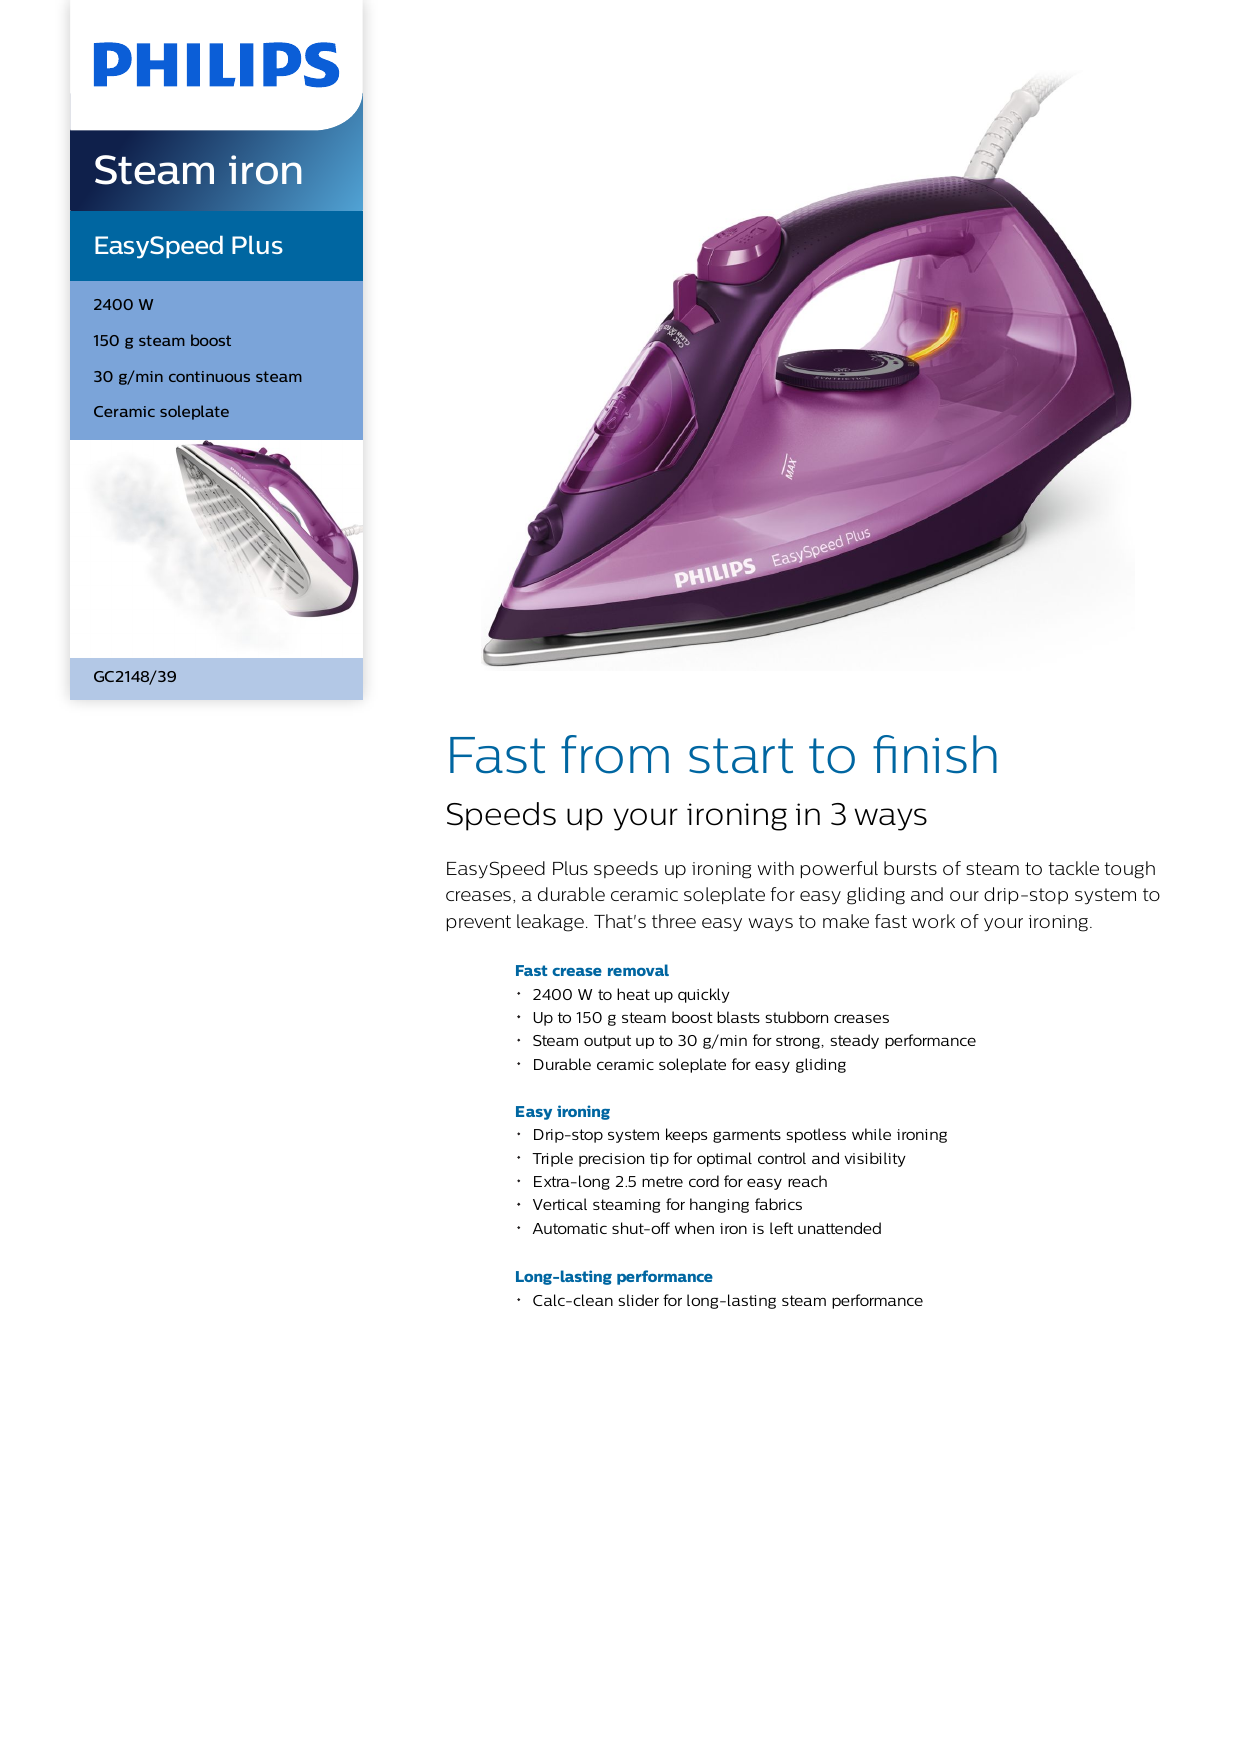 U.S. dollar Inquiry Try out Philips GC2148/39 EasySpeed Plus Steam iron Product Datasheet | Manualzz